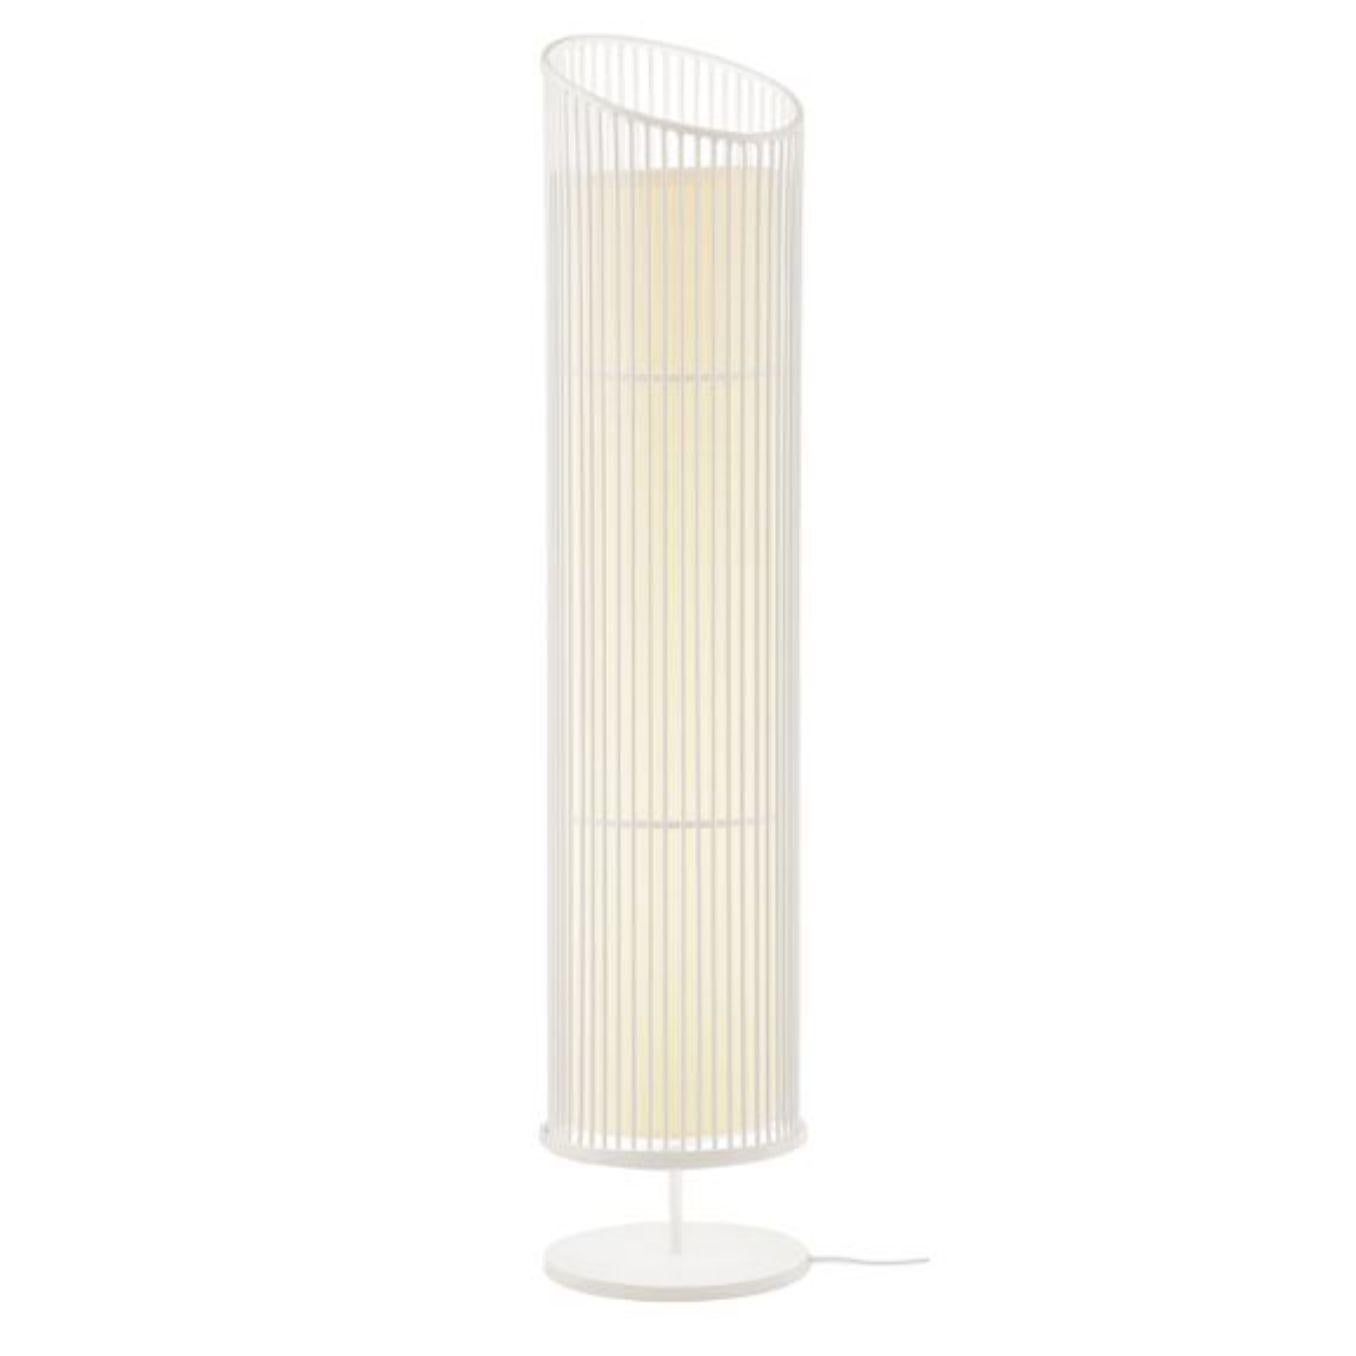 Portuguese Lipstick New Spider Floor Lamp by Dooq For Sale